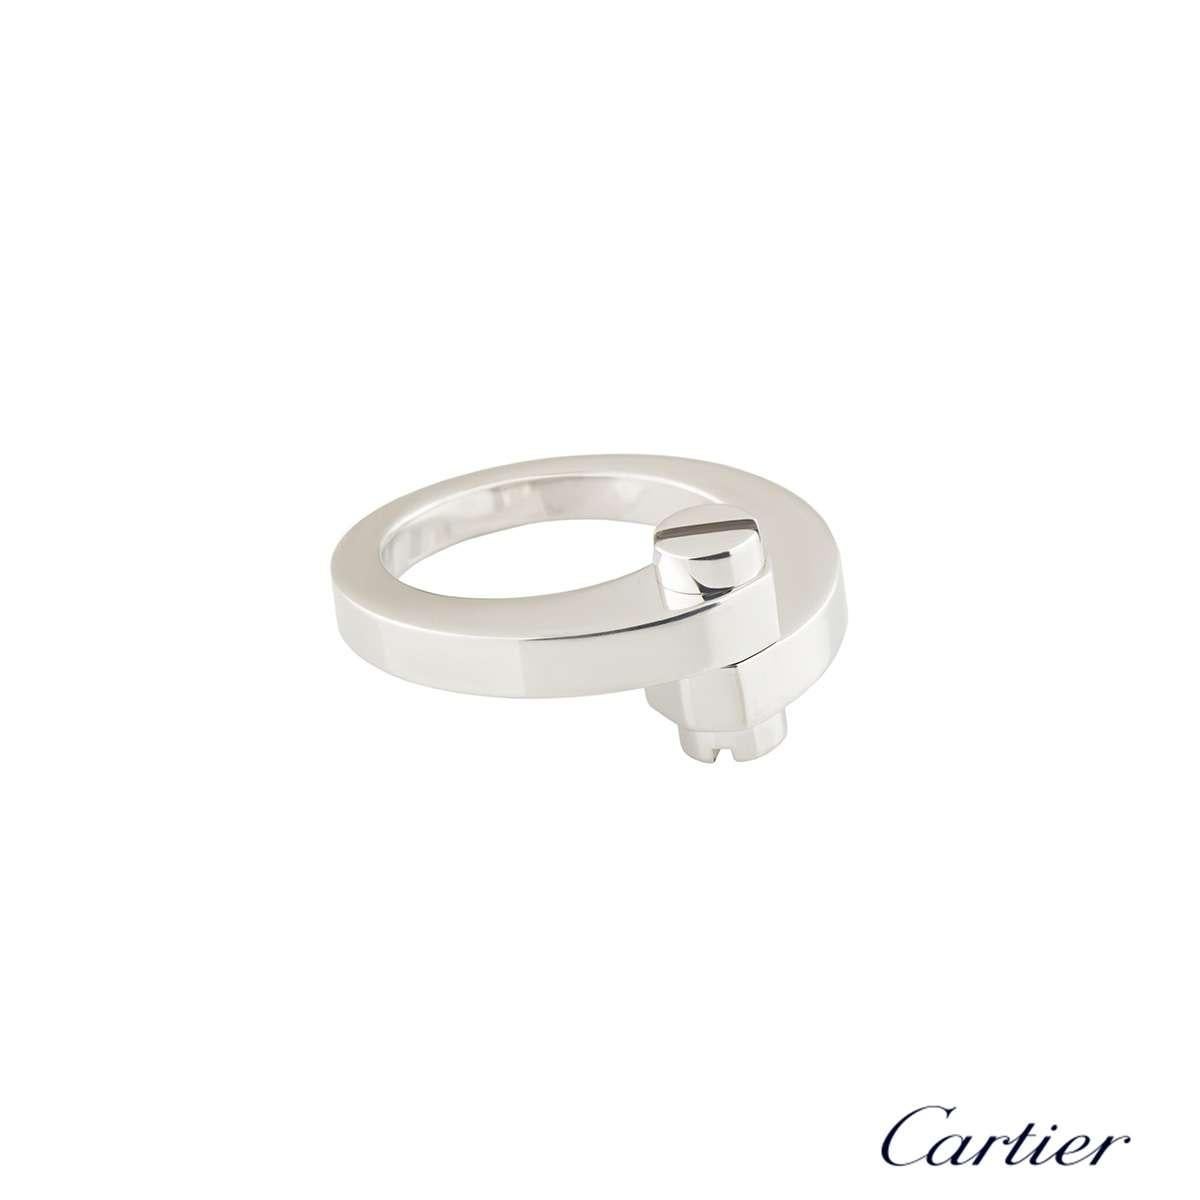 A trendy 18k white gold Cartier ring from the Menotte collection. The ring comprises of the iconic motif with two screw motif terminations. The ring is a size UK O/US 7/EU 55 and has a gross weight of 15.60 grams.

The ring comes complete with a